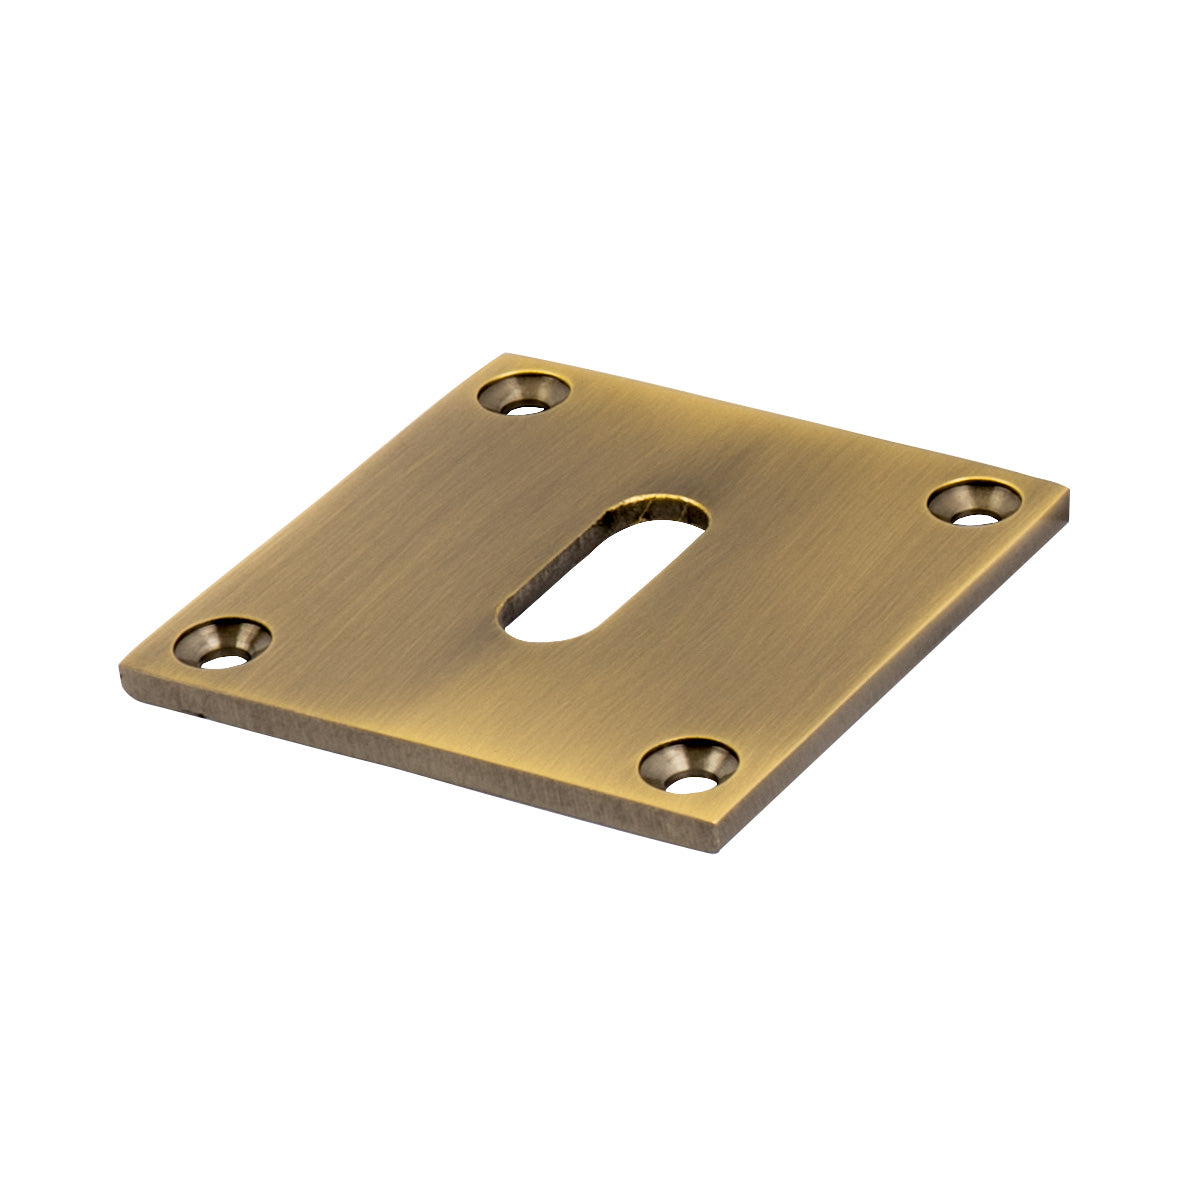 aged brass square escutcheon low profile plate, British Standard keyhole cover plate SHOW